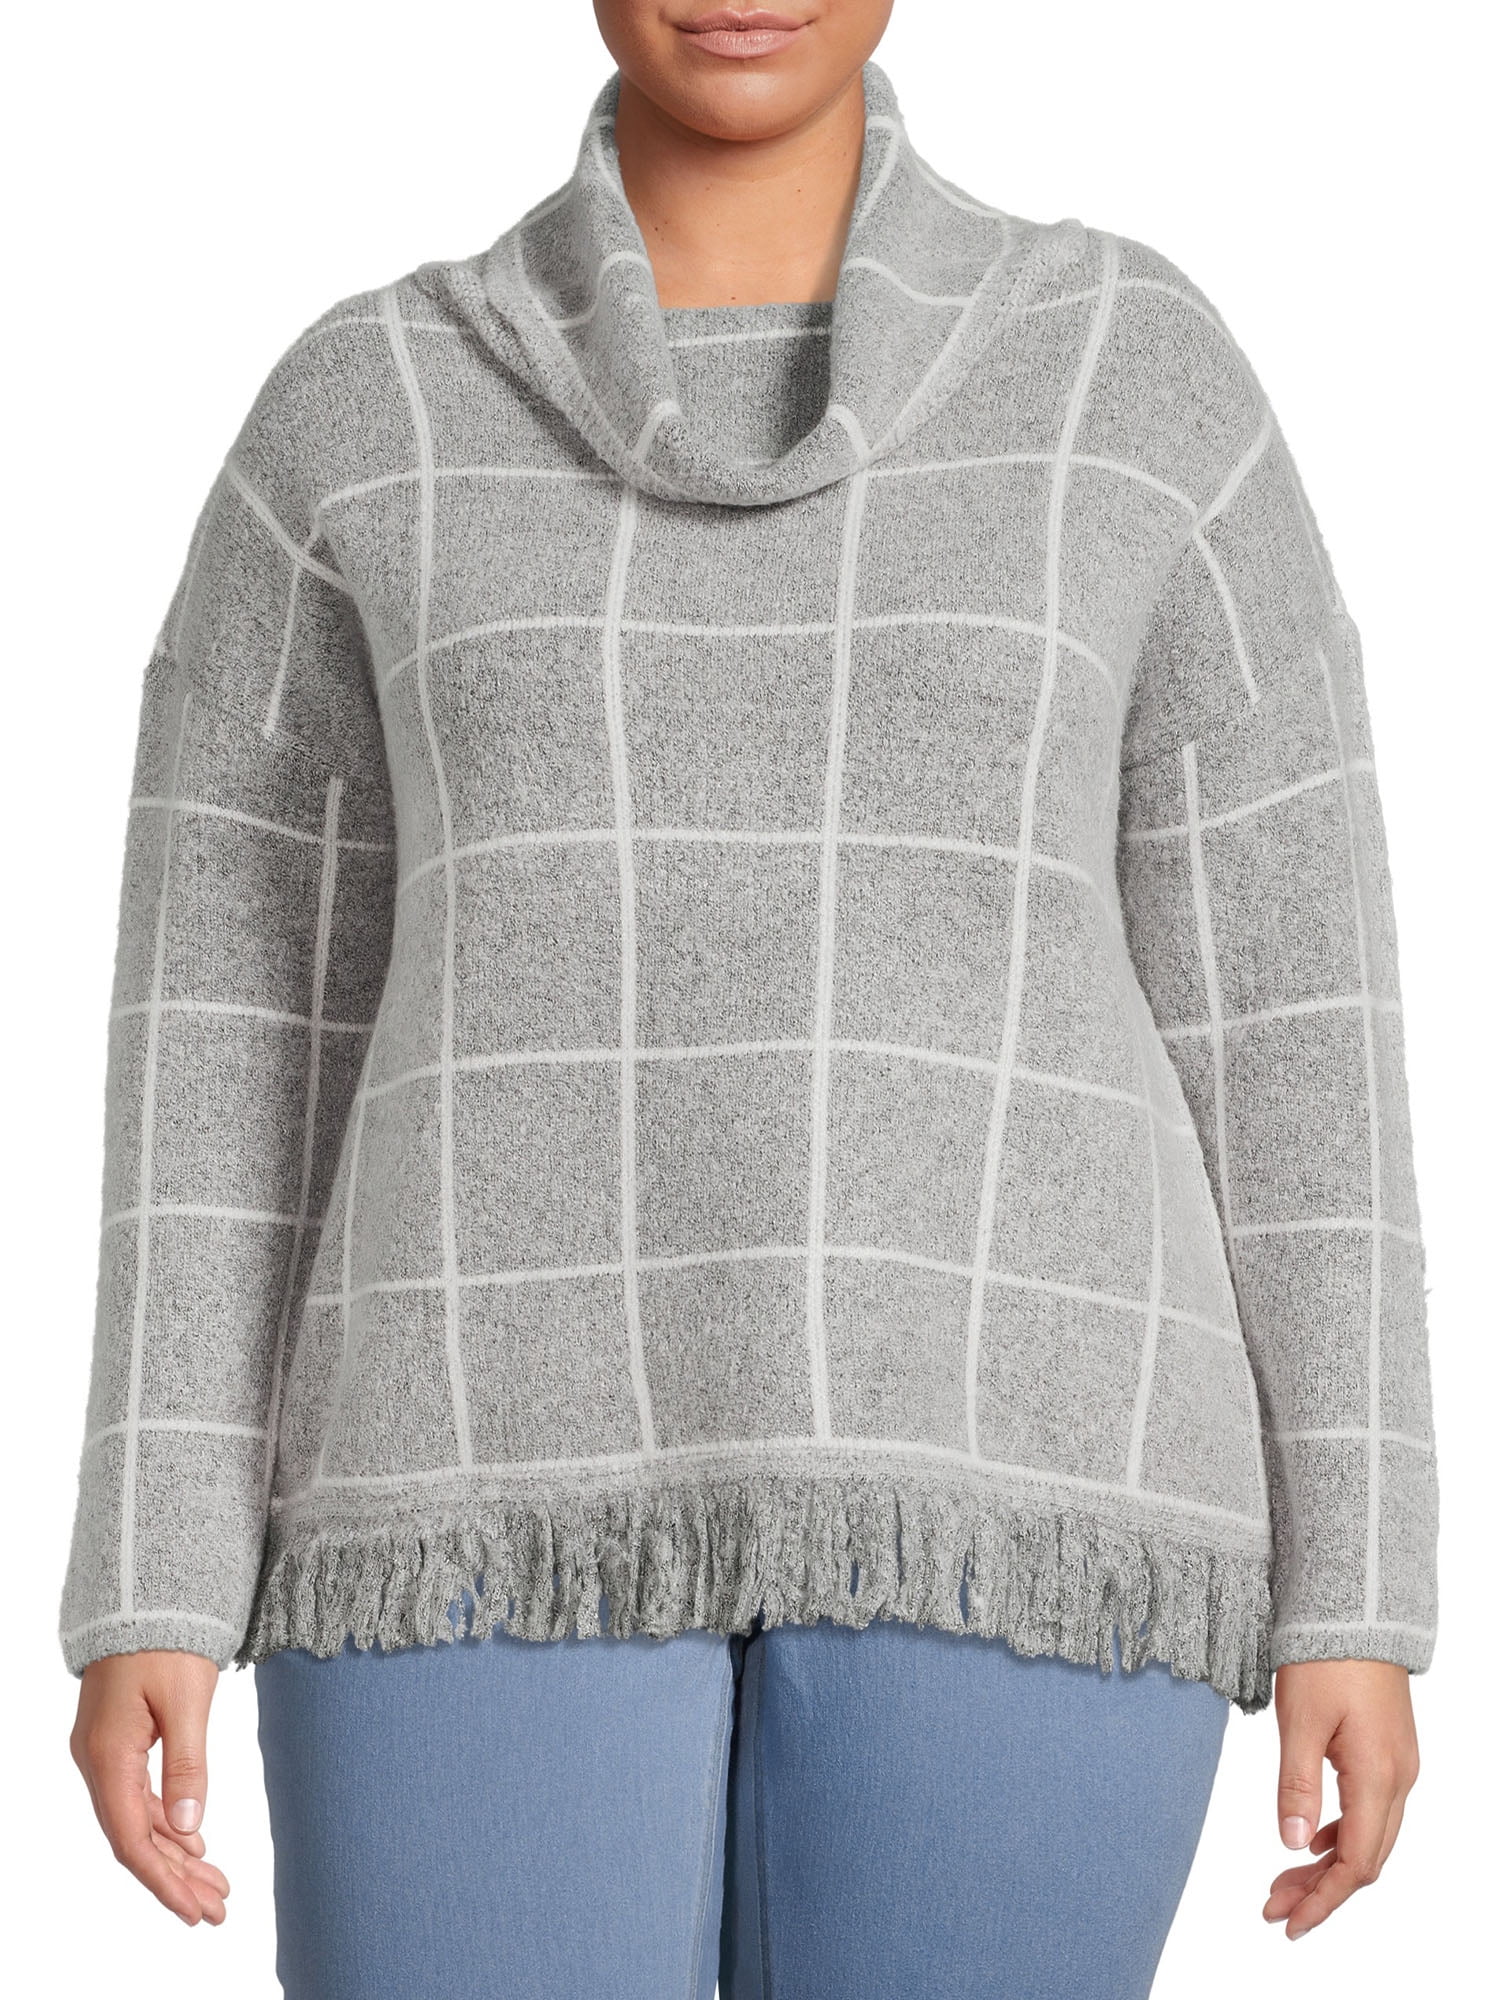 Womens Sweaters Charming and Comfortable Round Neck Jacquard Plaid